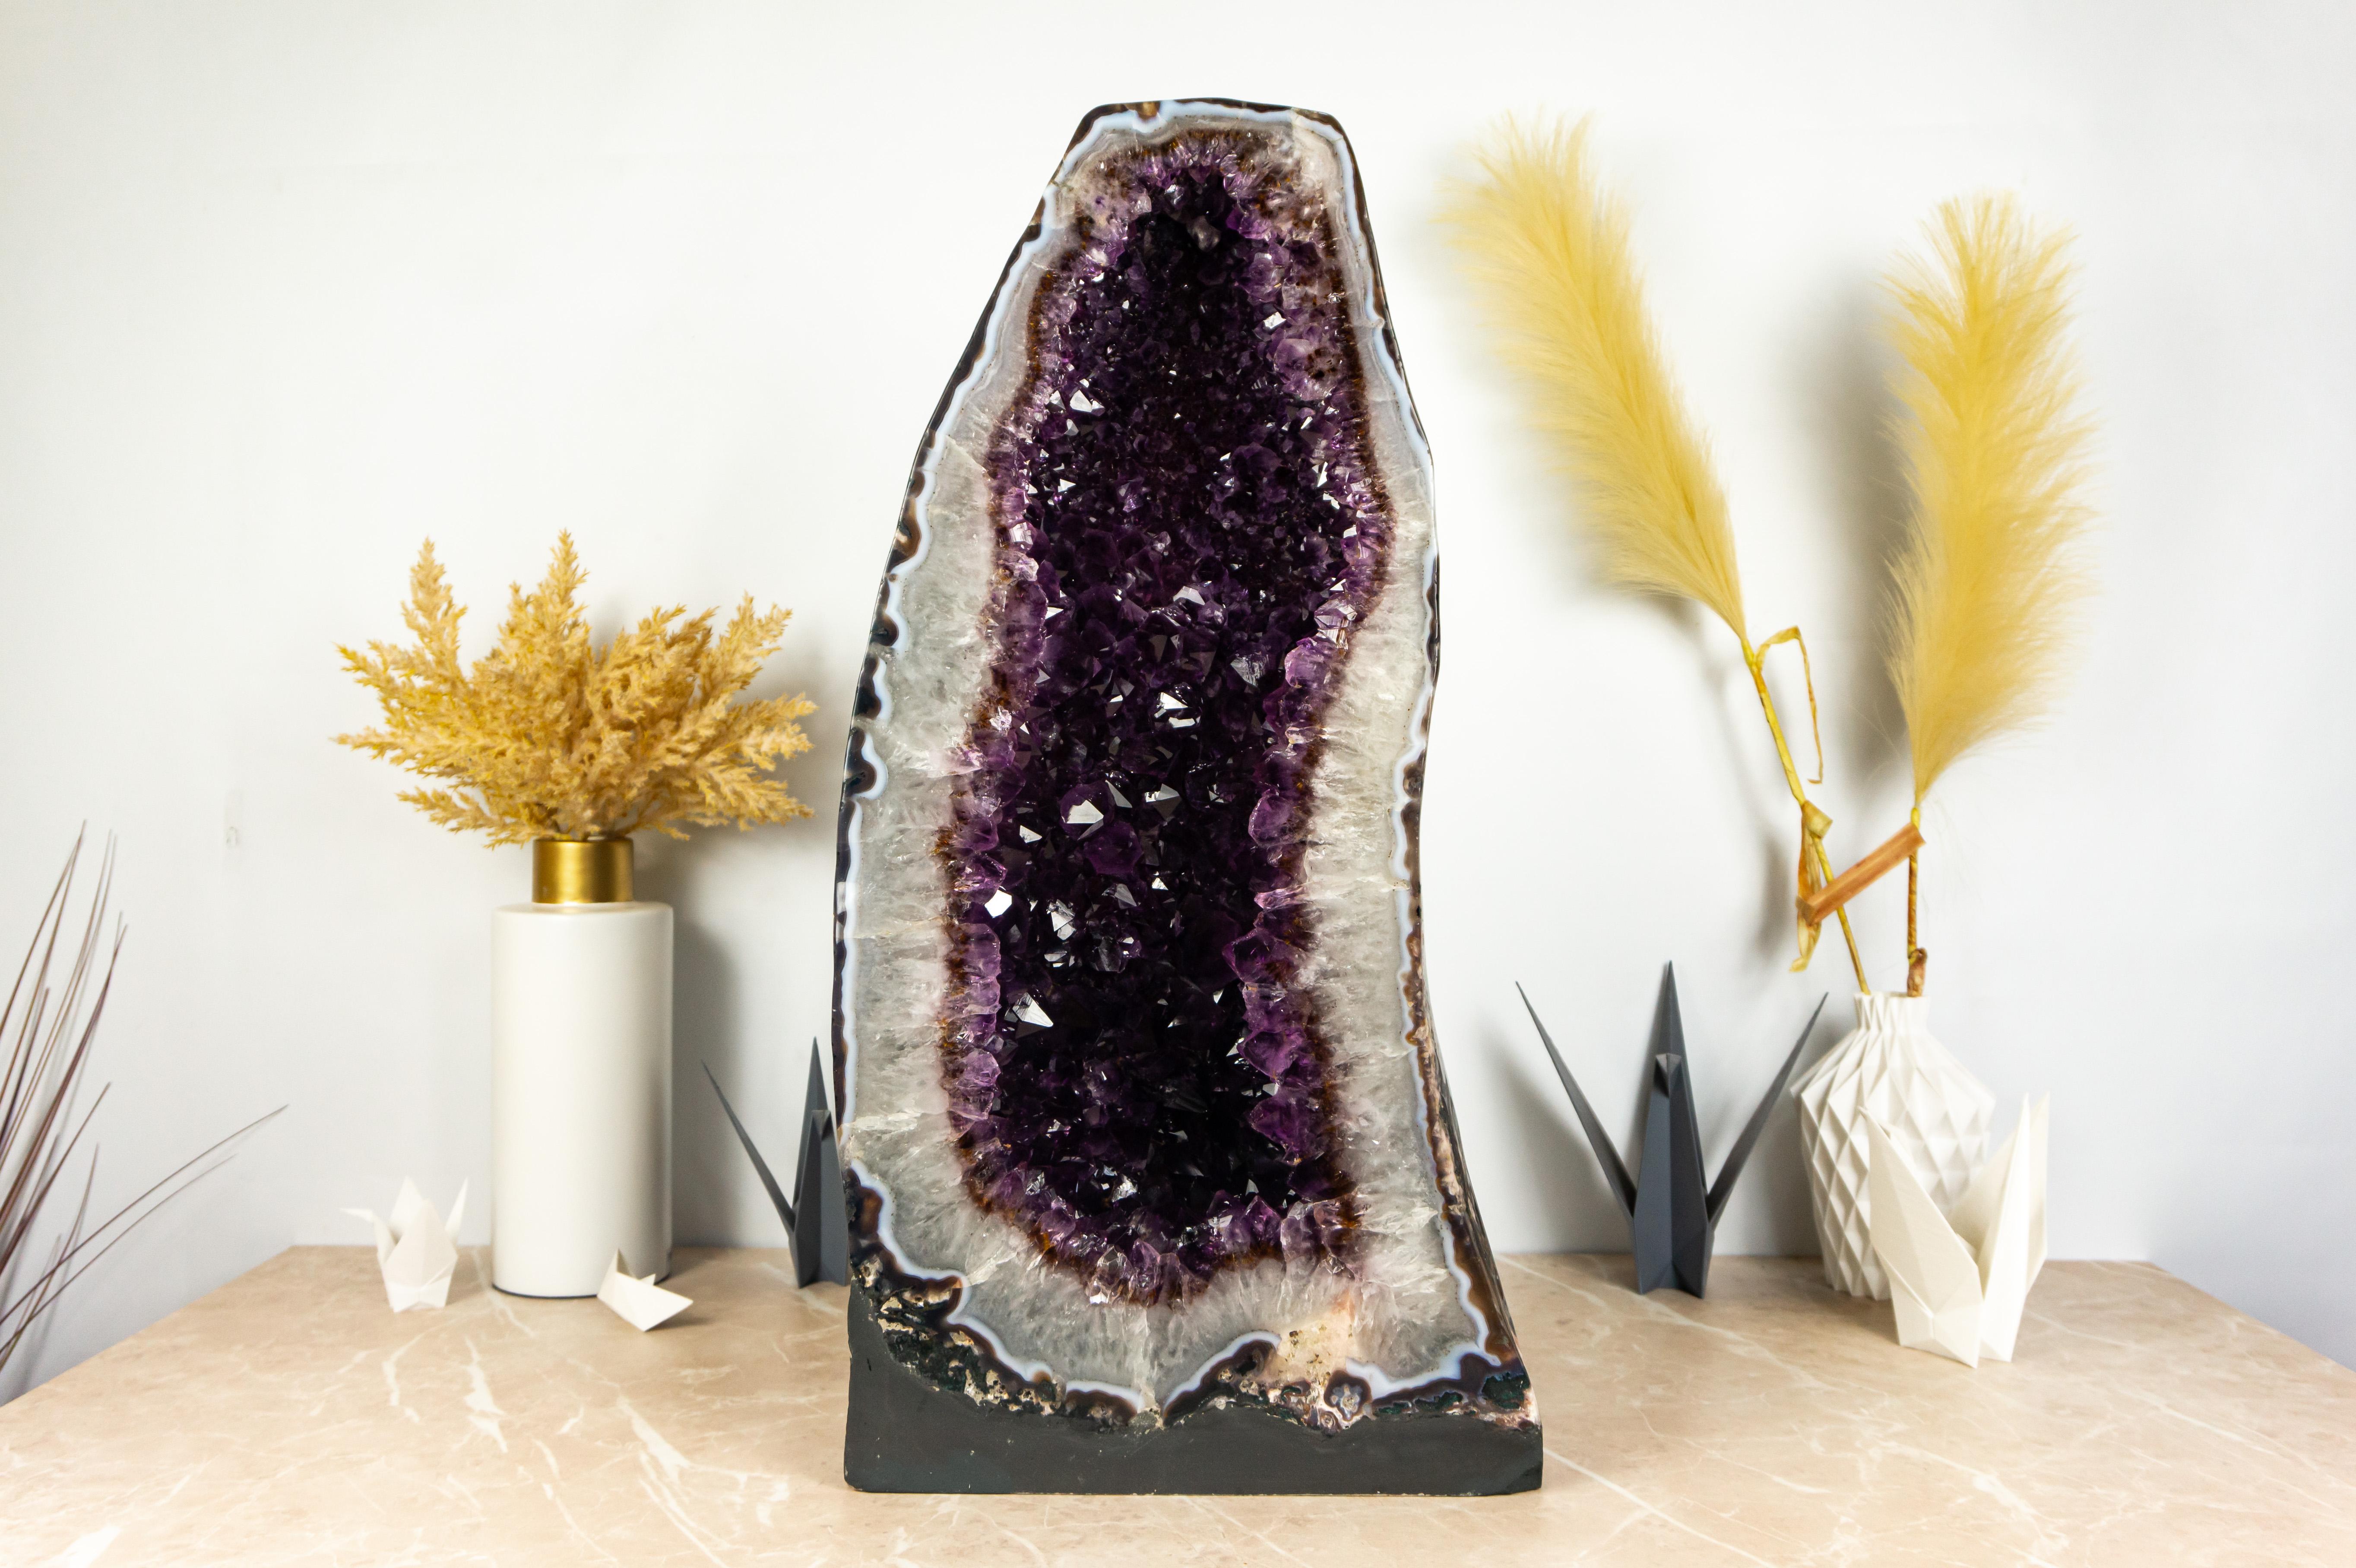 Rare in many ways, this Amethyst geode brings an aesthetically pleasing formation with its purple amethyst crystals beautifully contrasting against the white quartz, creating a stunning beauty that is further enhanced by the spread of golden